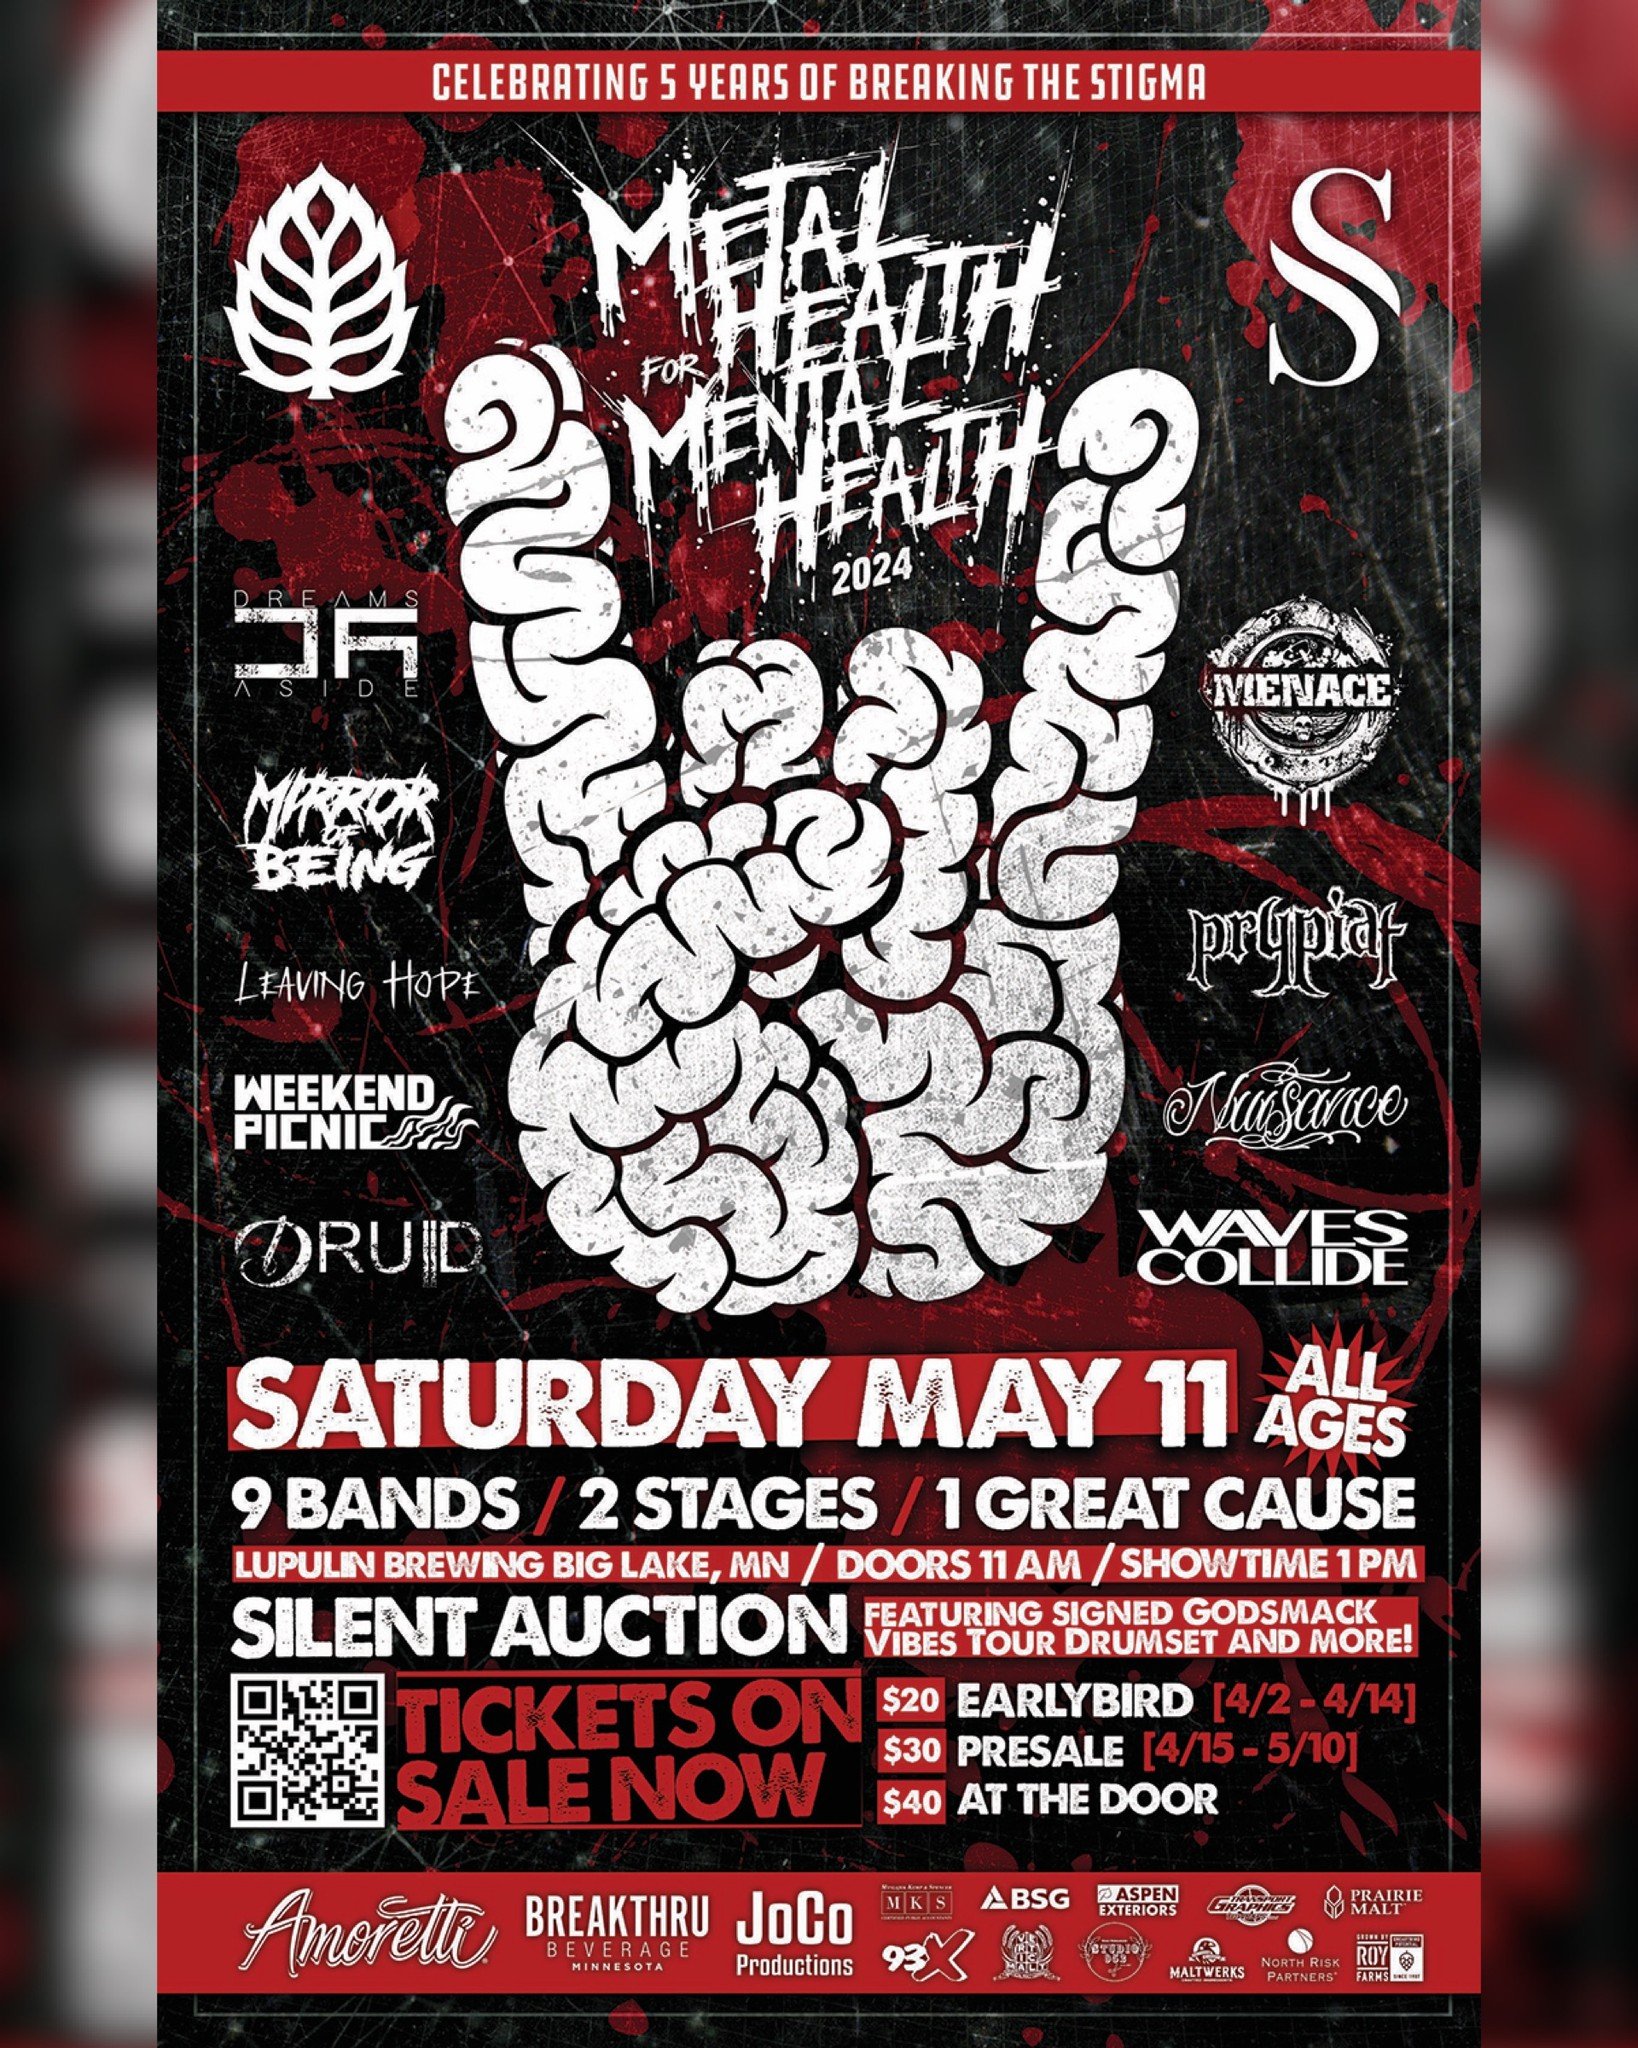 THIS SATURDAY‼️ @lupulin_brewing and @thescarsfoundation will be celebrating the 5th year of their #MetalHealthForMentalHealth event to celebrate #MentalHealthAwarenessMonth! 🤘🍺 💛 If you are in the MN area come out and experience a night of music,